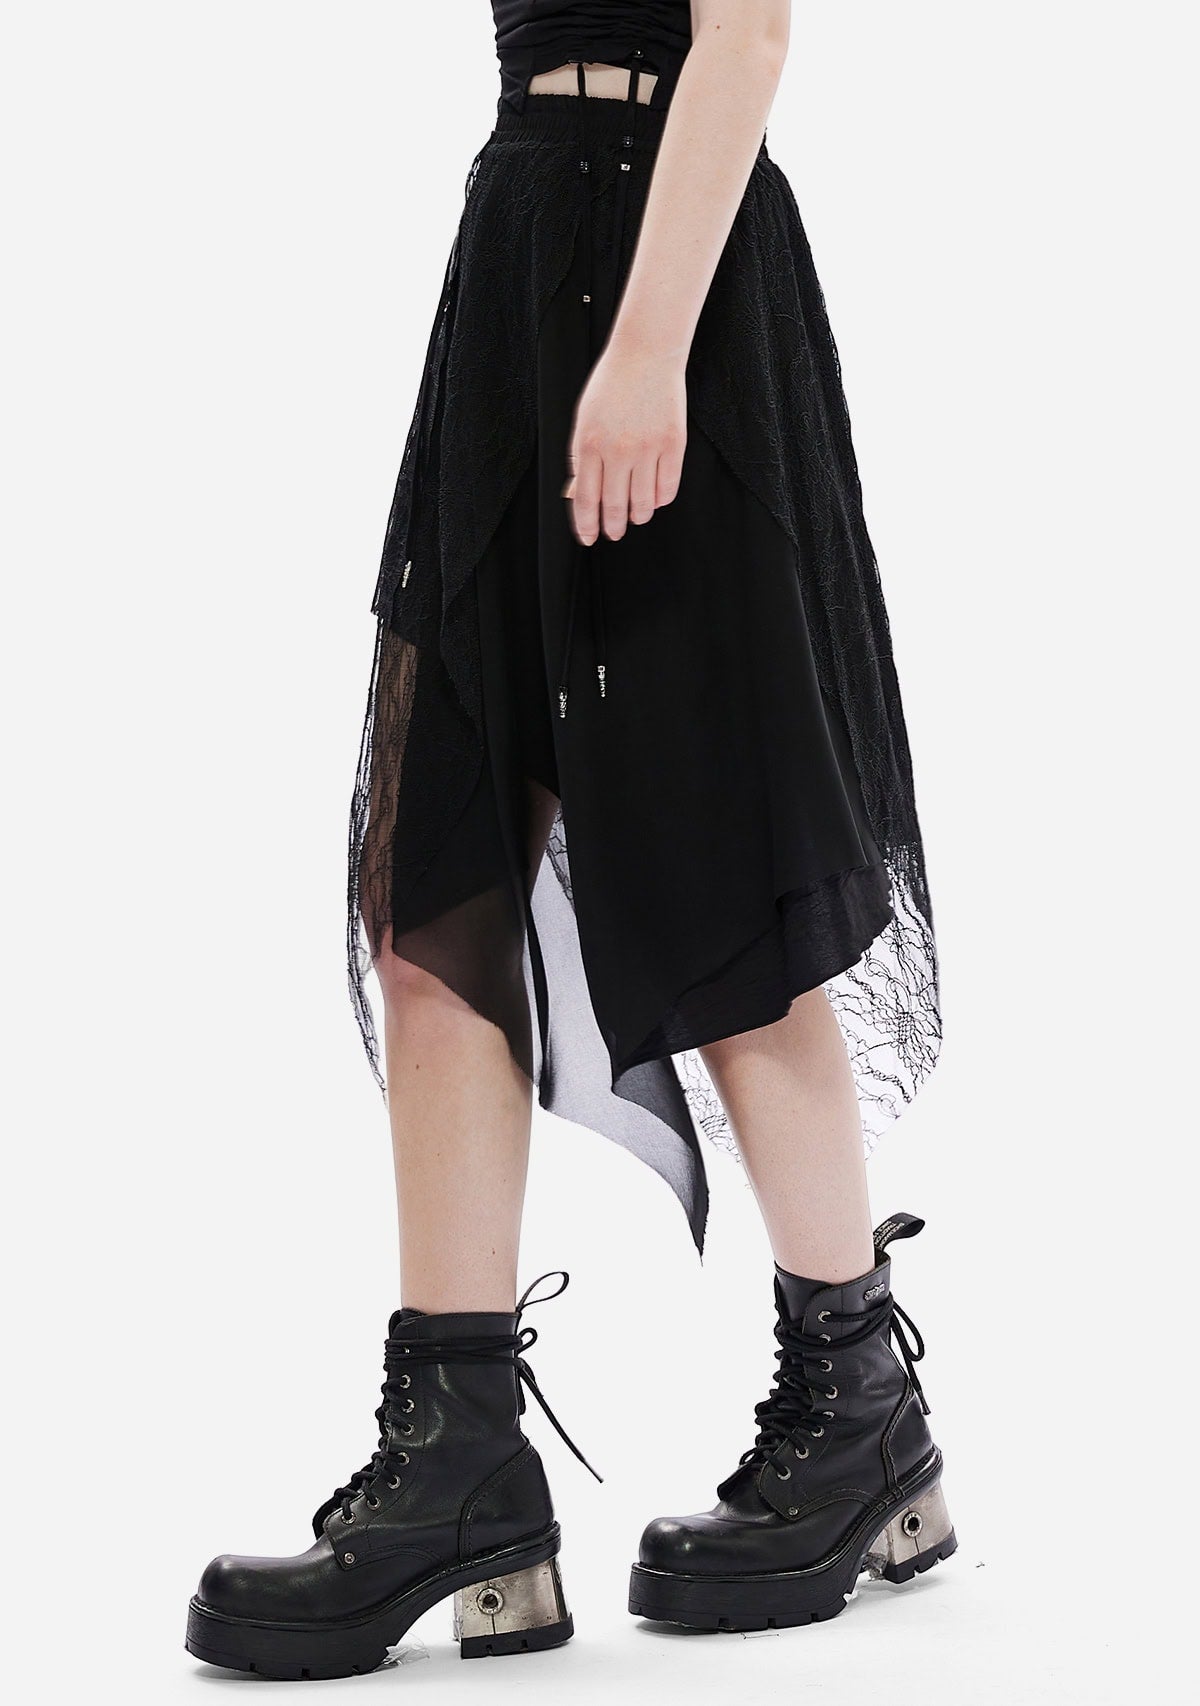 Gothic Layered Lace Asymmetric Skirt